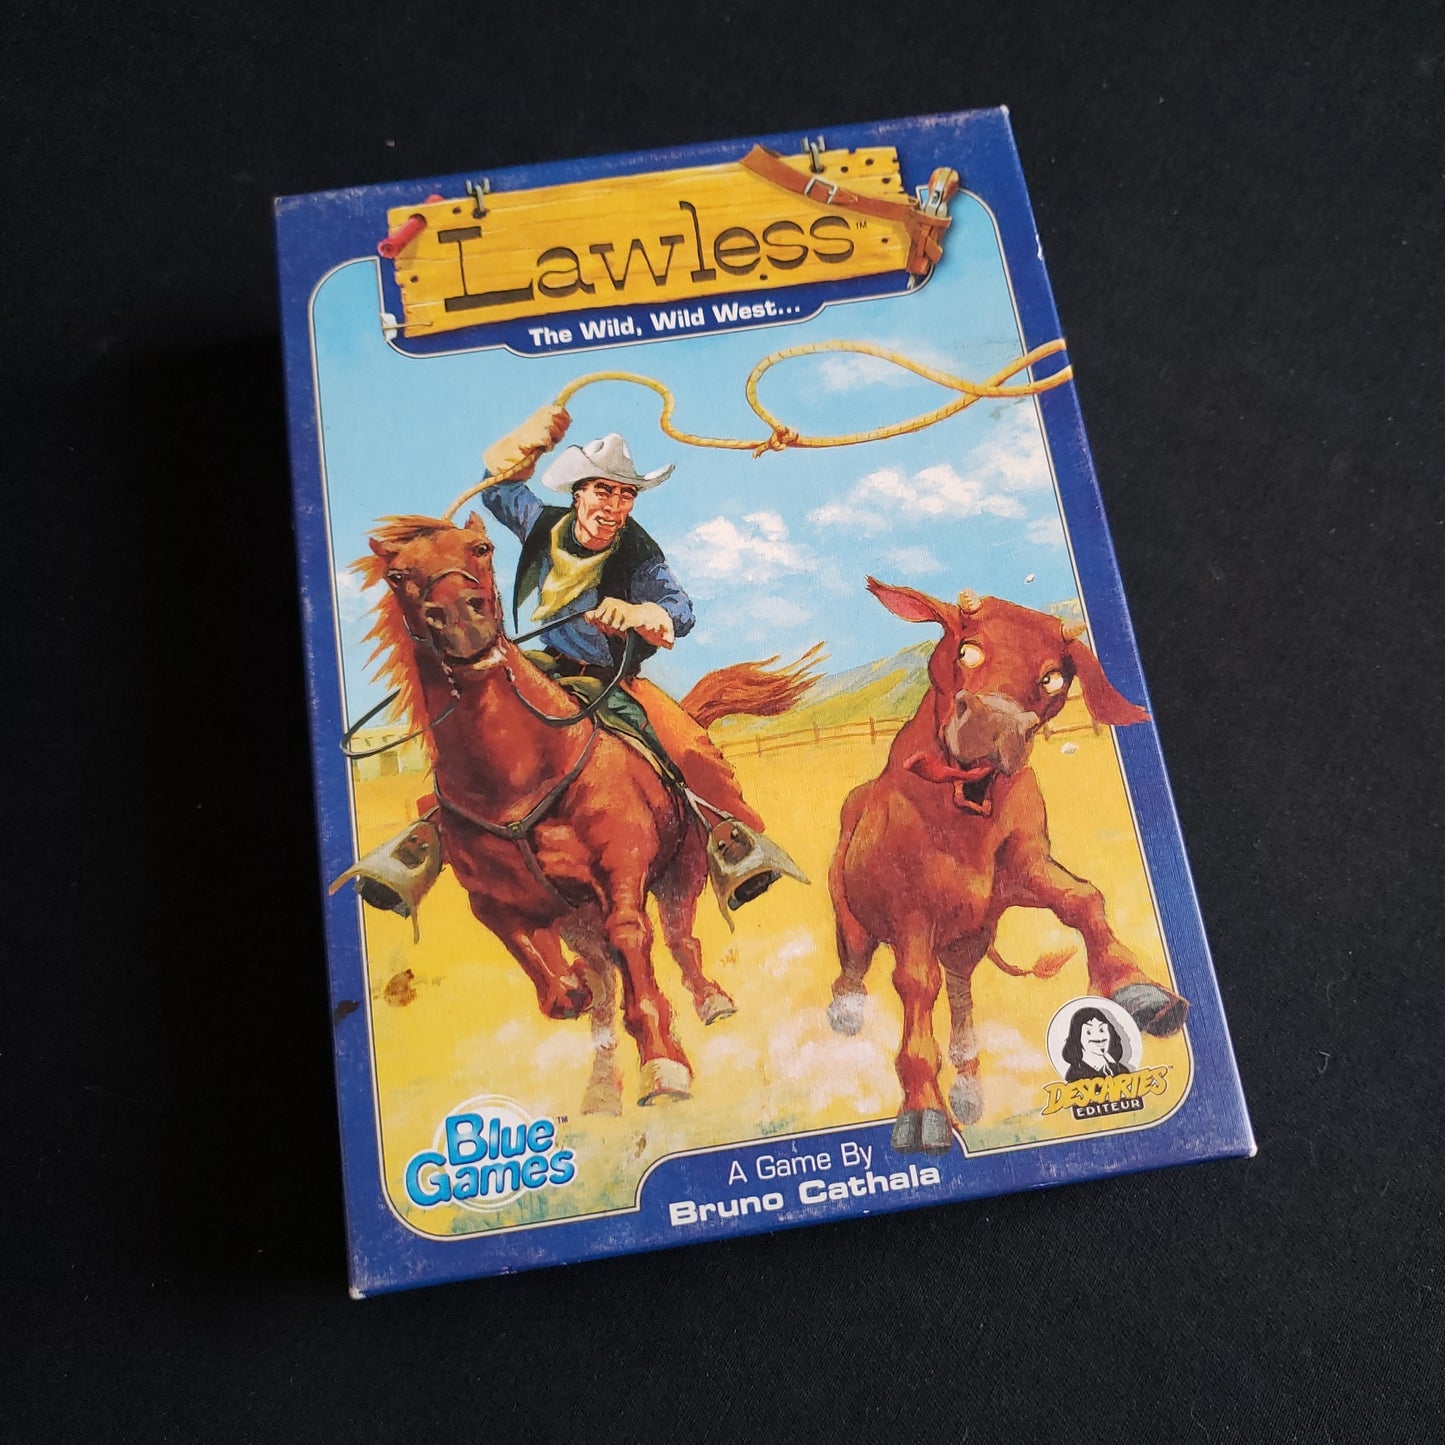 Image shows the front cover of the box of the Lawless card game